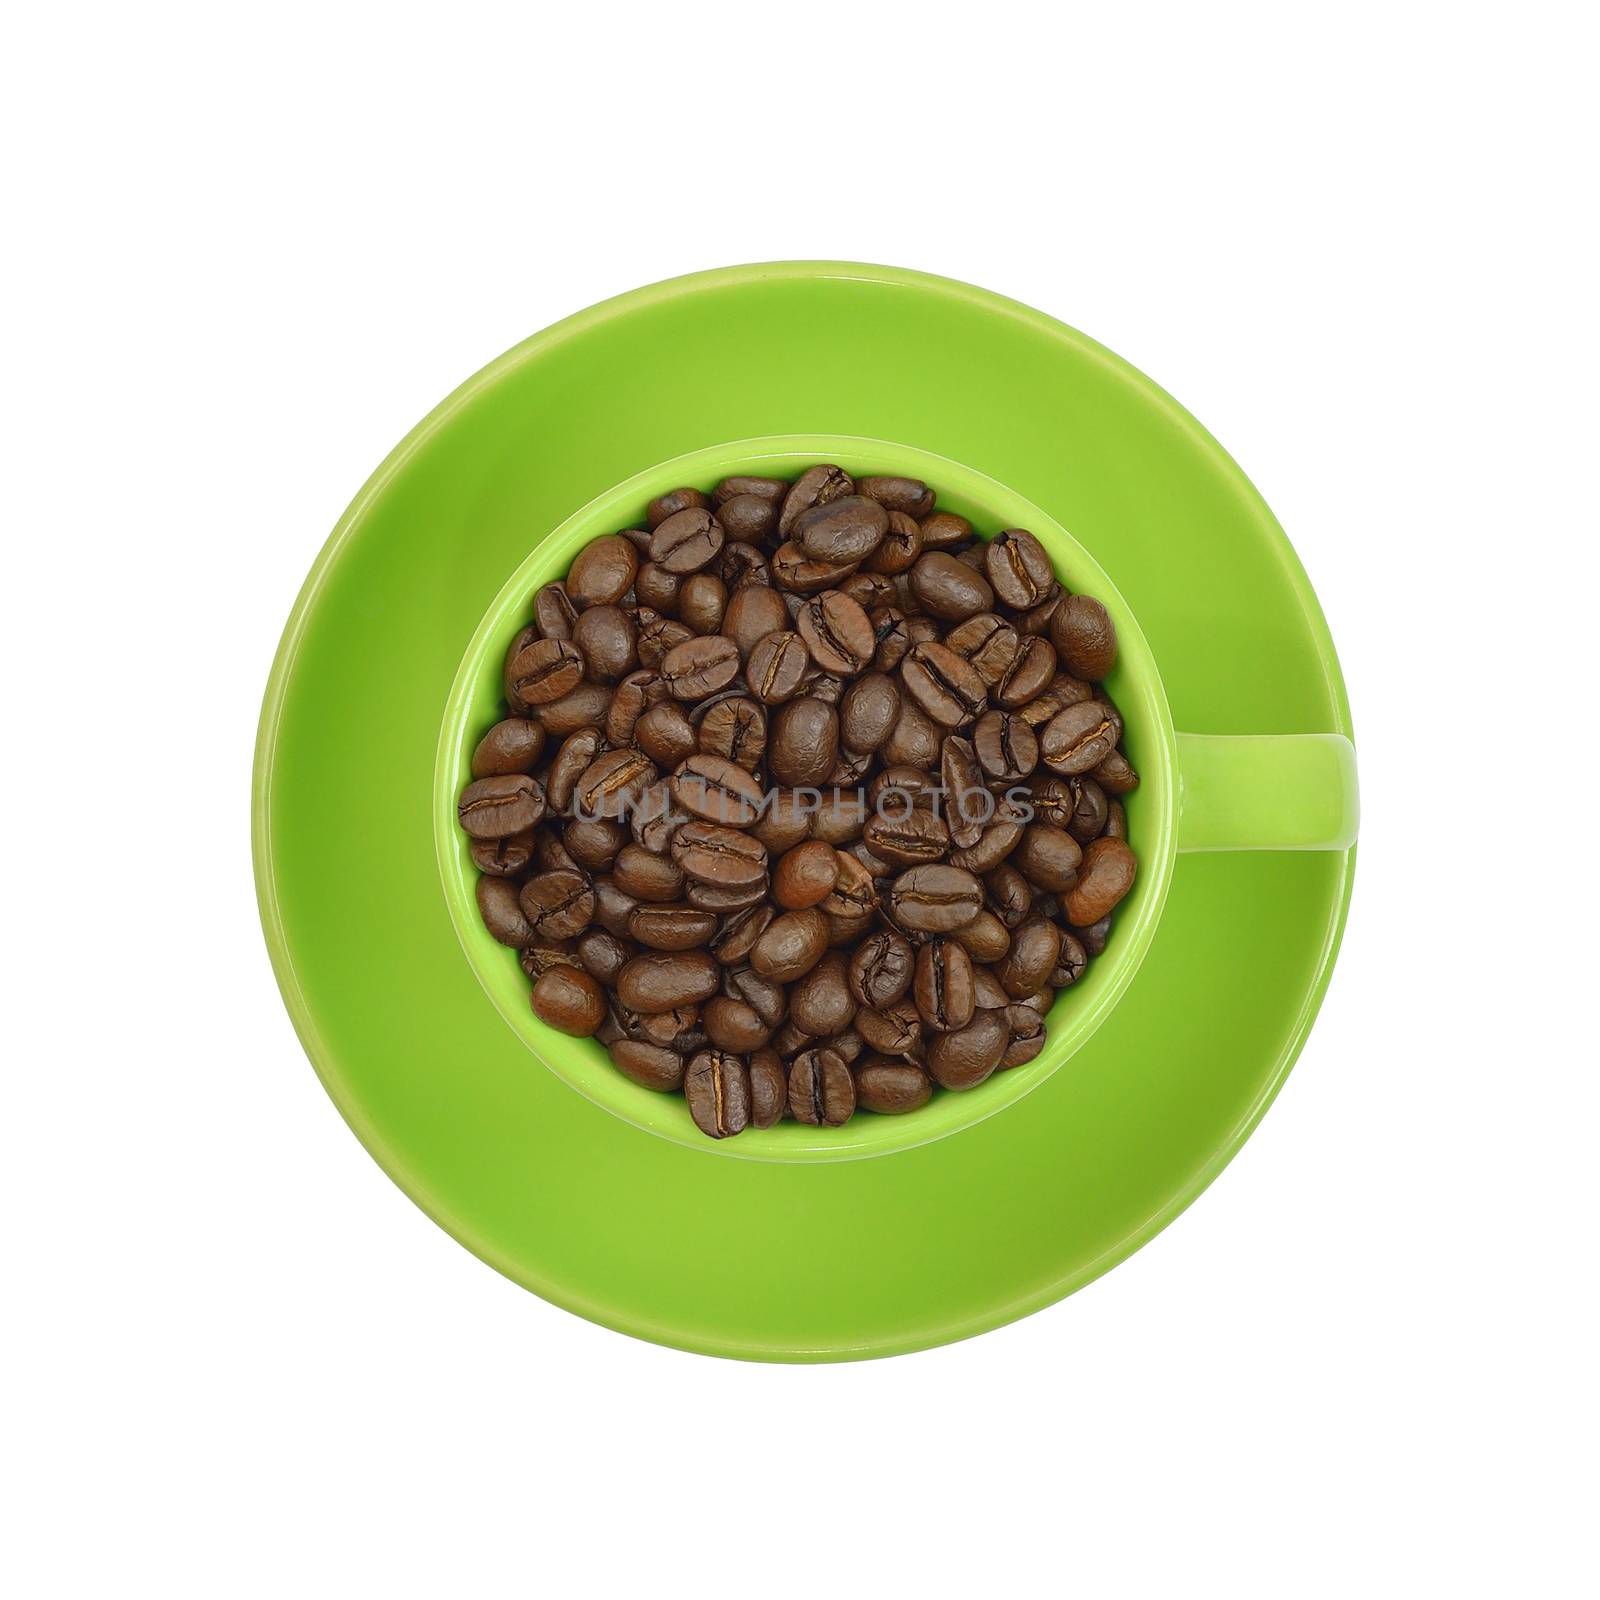 Coffee beans in a green cup by cherezoff